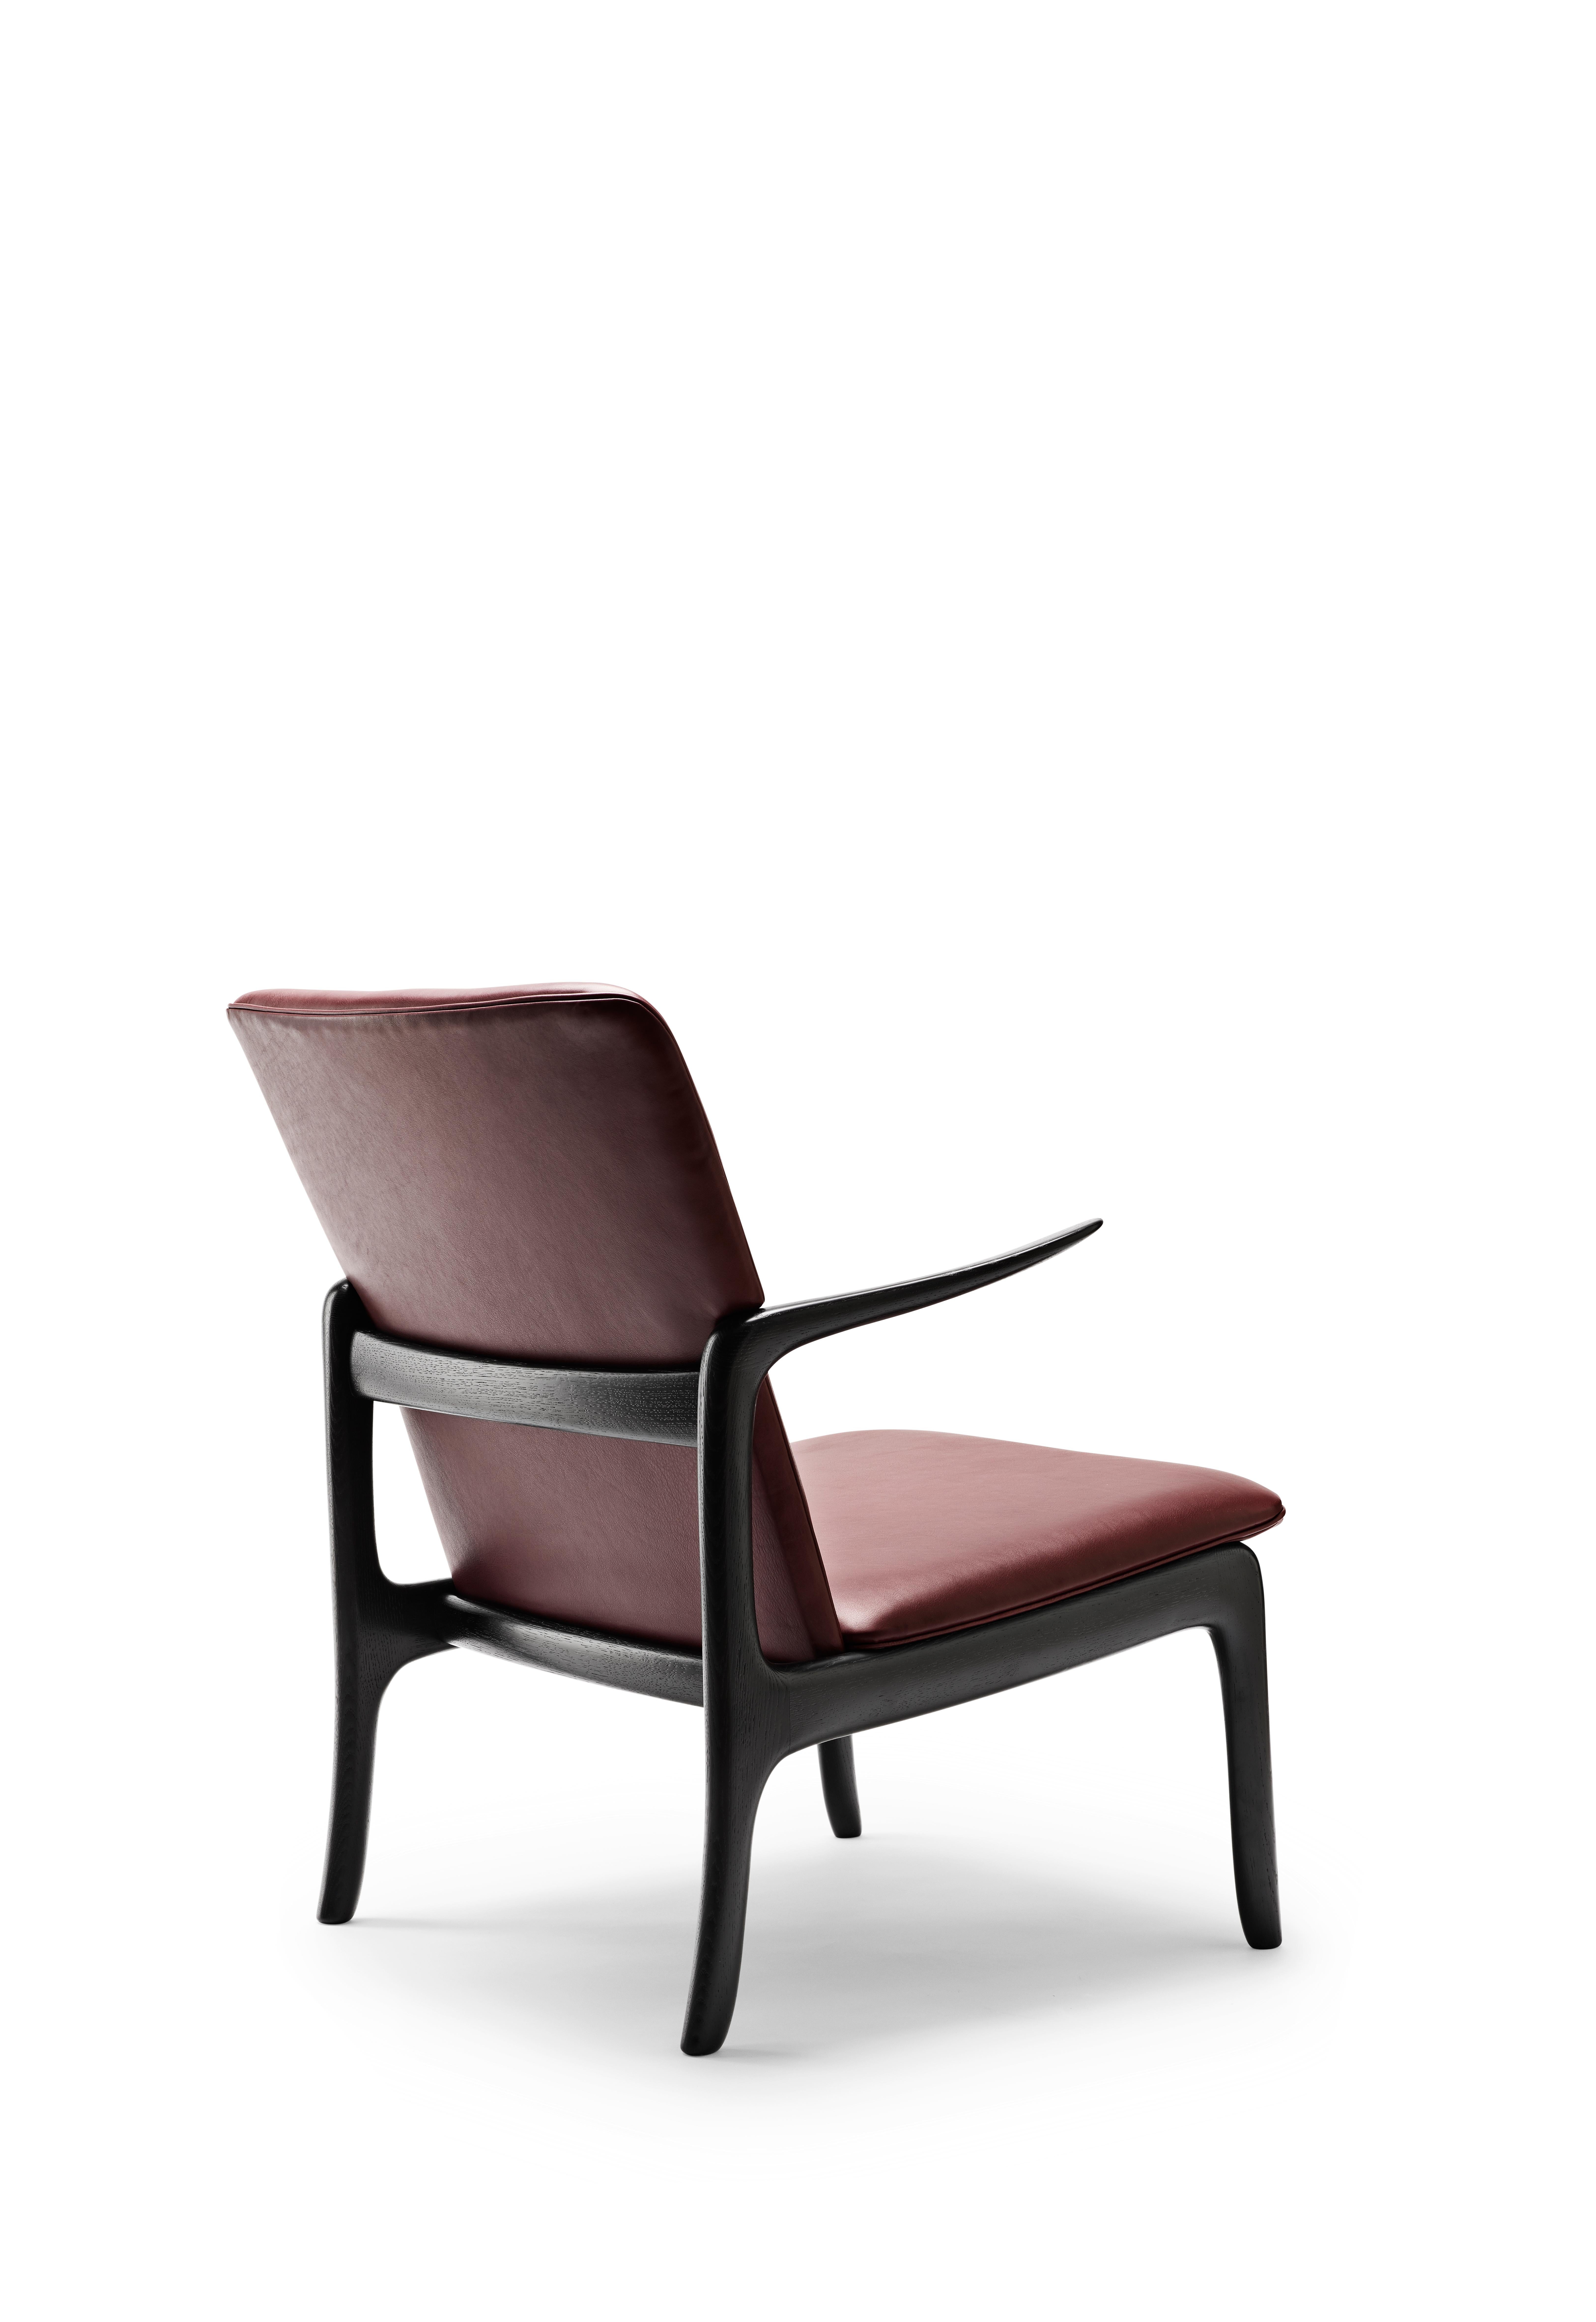 Red (Sif 93) OW124 Beak Chair in Oak Painted Black by Ole Wanscher 2